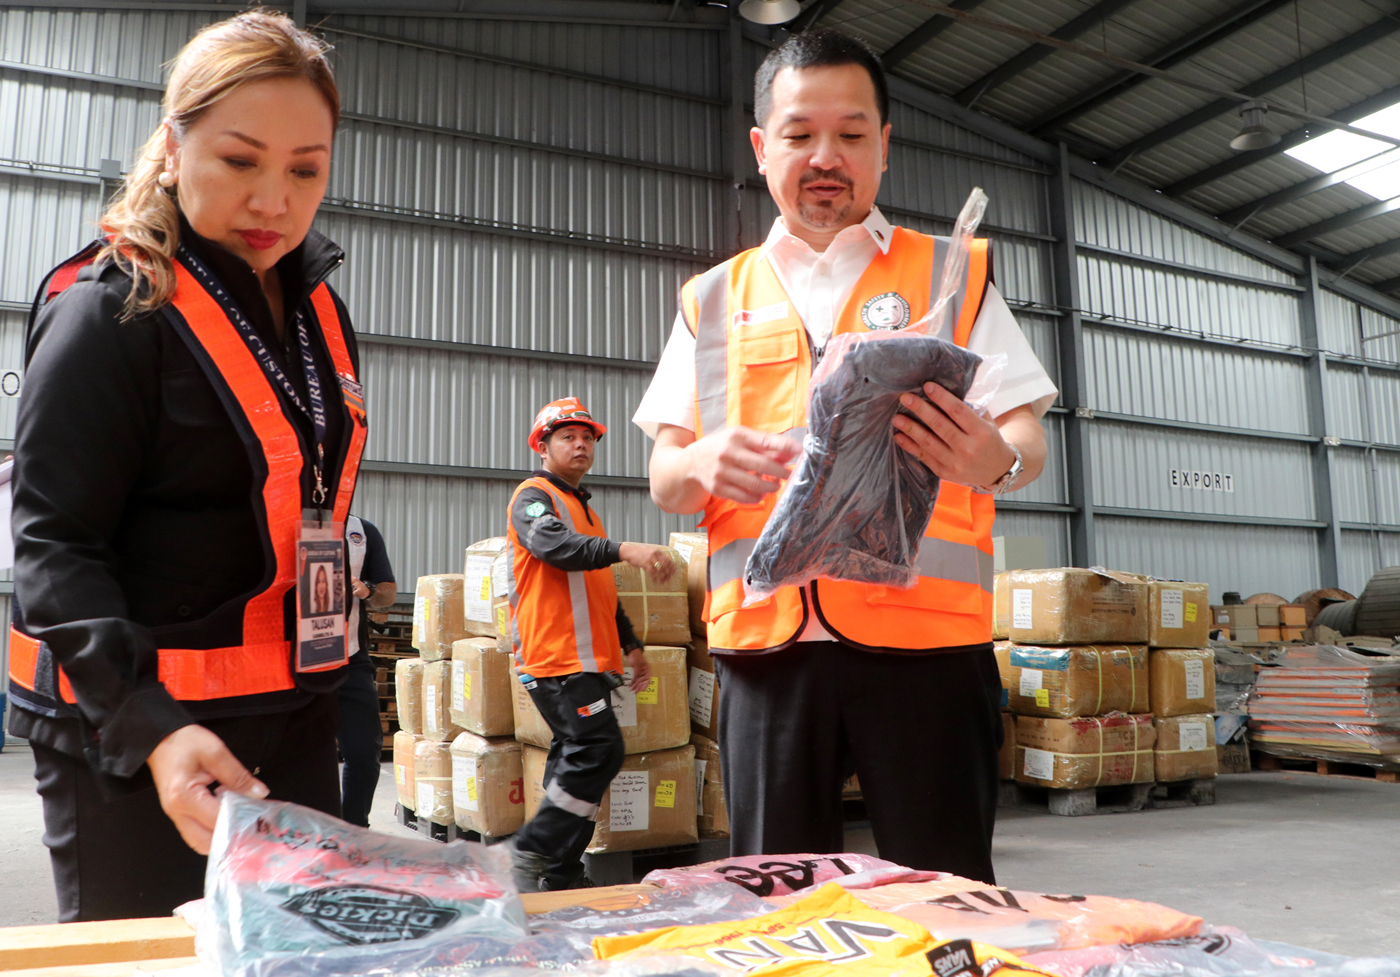 Subic Bay Metropolitan Authority (SBMA) Chairman and Administrator Jonathan D. Tan joins Port of Subic district collector Carmelita Talusan during an inspection of the counterfeit items valued at PHP 240 million, which were intercepted by authorities over the weekend in the Subic Bay Freeport Zone.